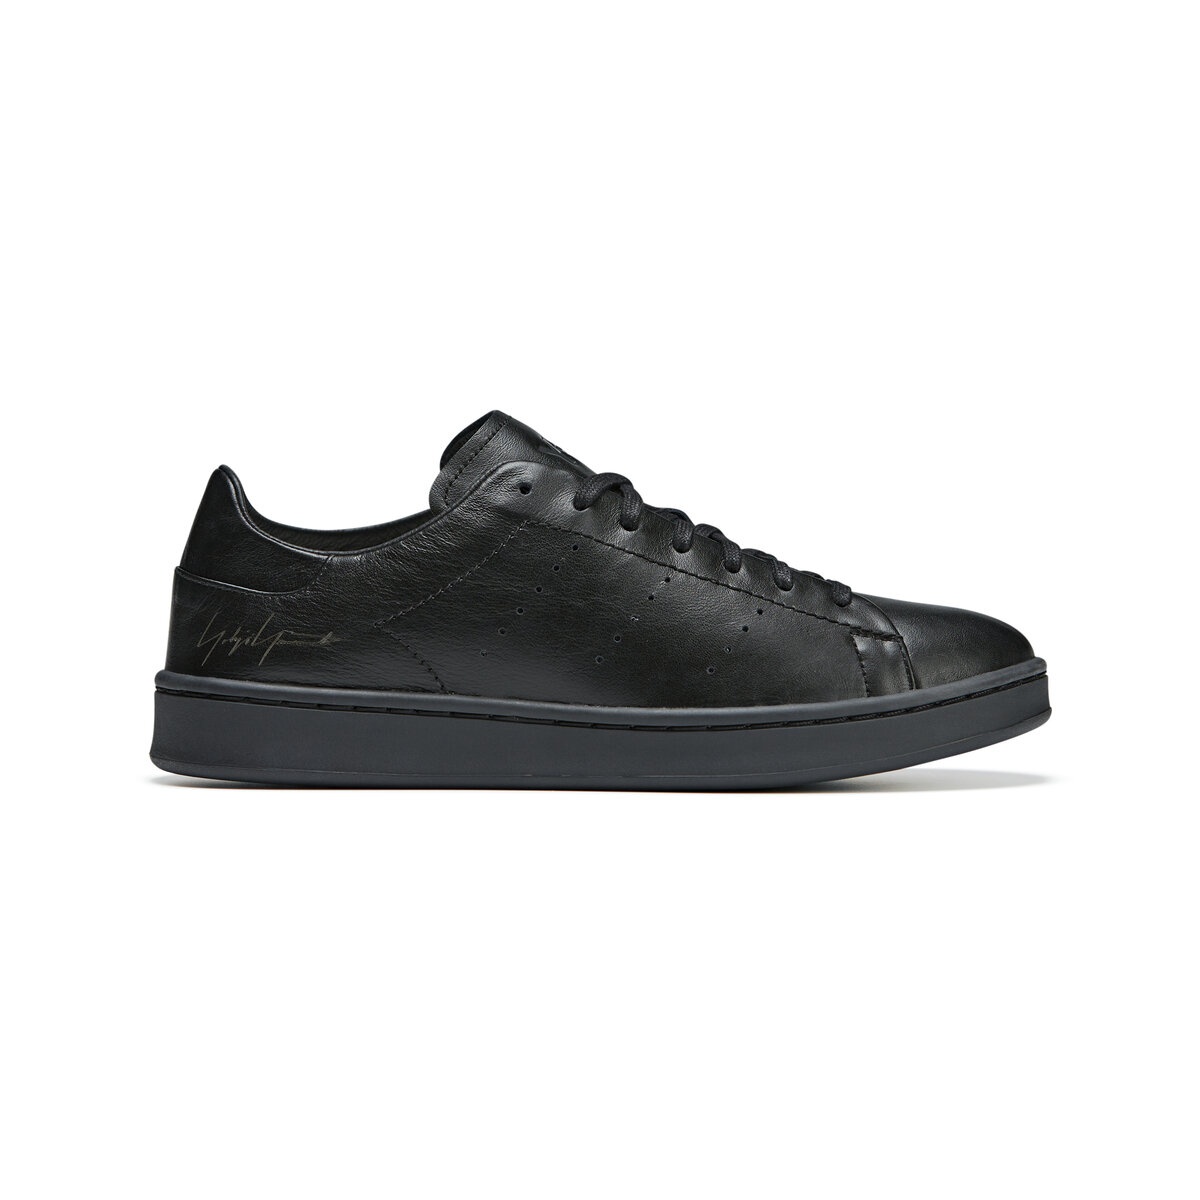 Stan Smith Sneakers in Black - 1